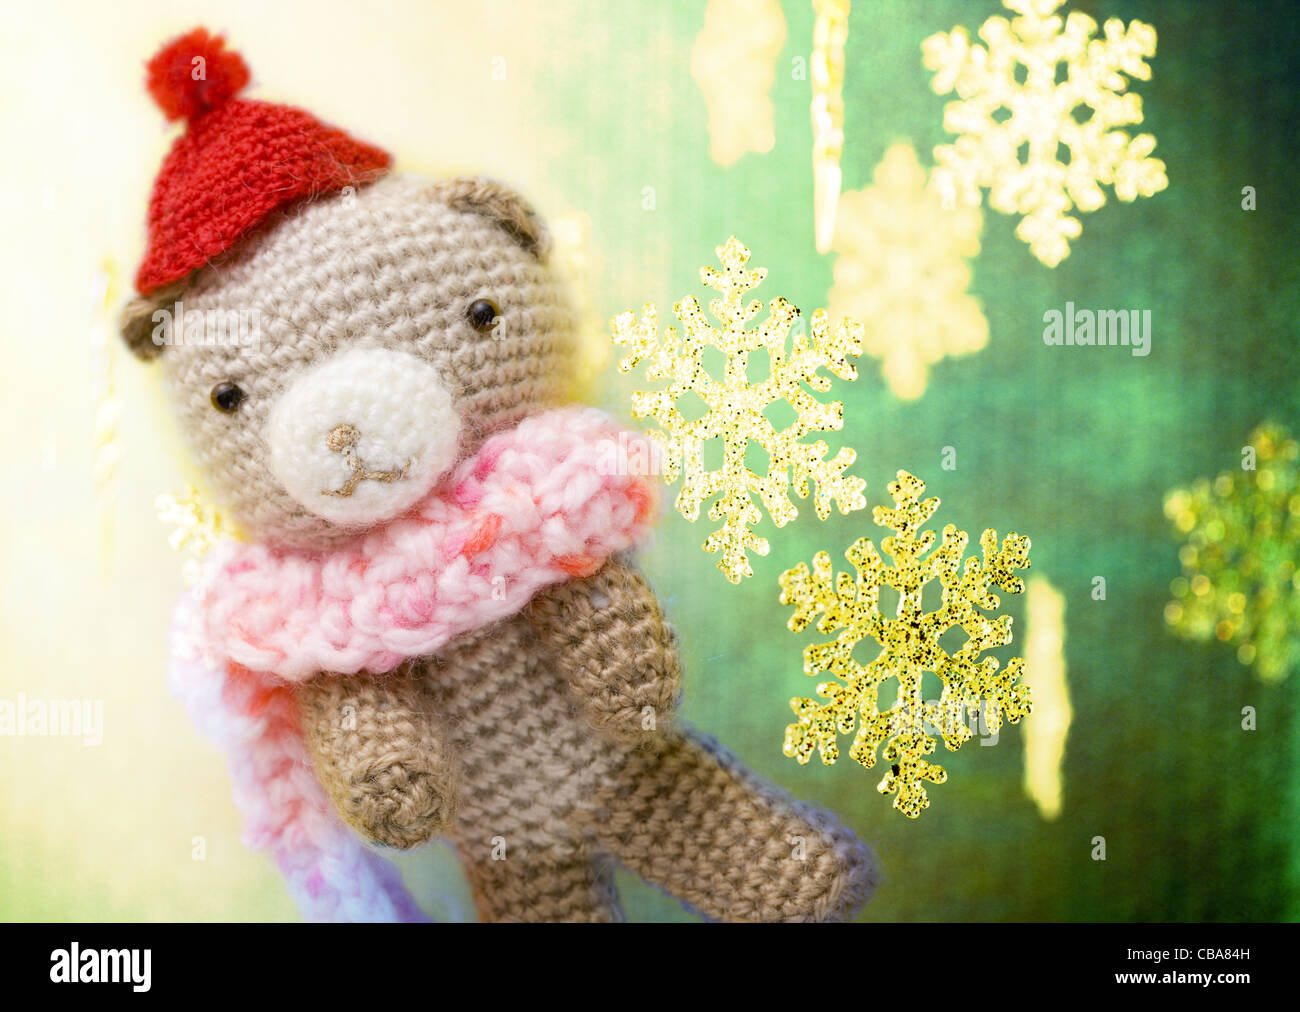 Knitted stuffed bear toy and snow crystal Stock Photo